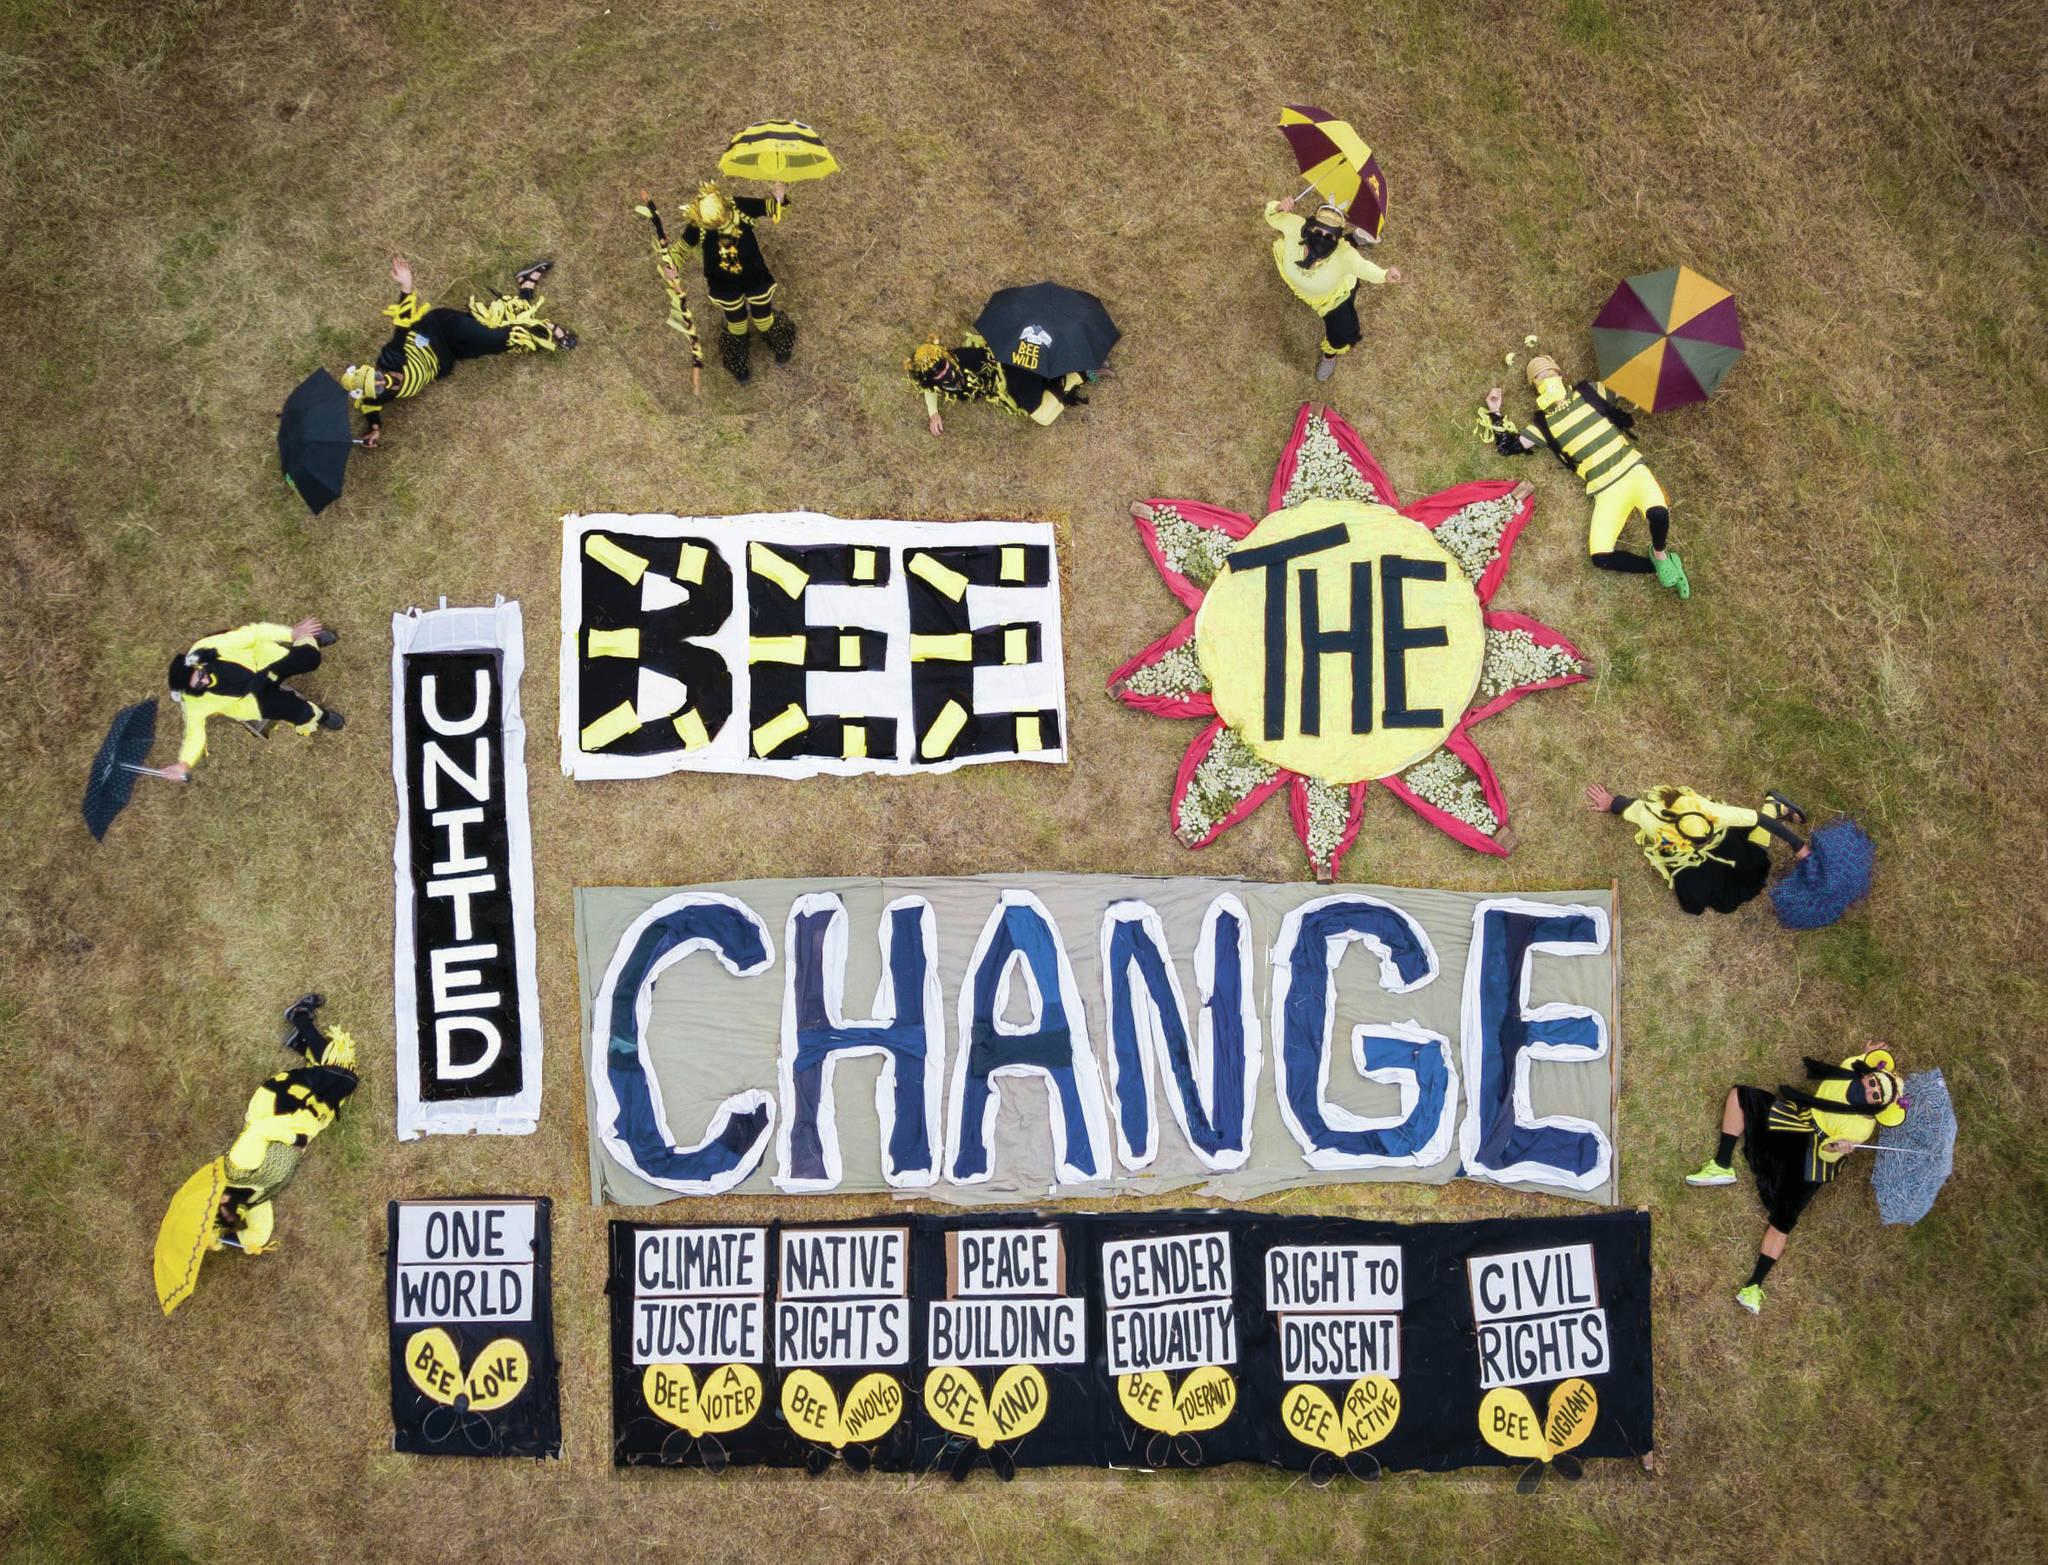 Members of Mavis Muller’s “BEE the change” art project pose for a drone photograph on July 5, 2020, at Muller’s home in Homer, Alaska. (Photo by John Newton)